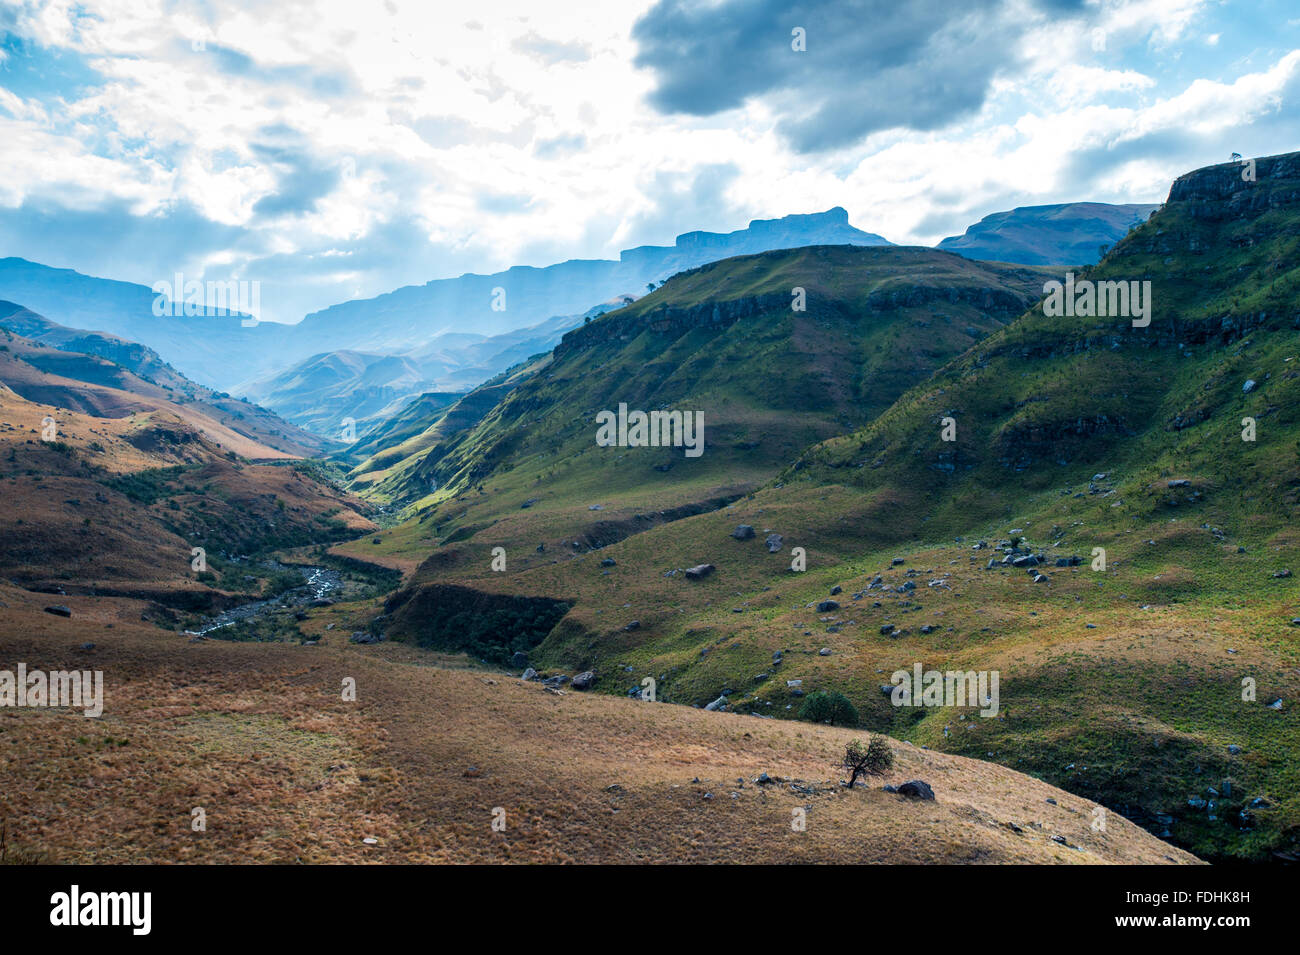 Landscape of mountain with a river winding through the valley in Sani Pass, between South Africa and Lesotho. Stock Photo